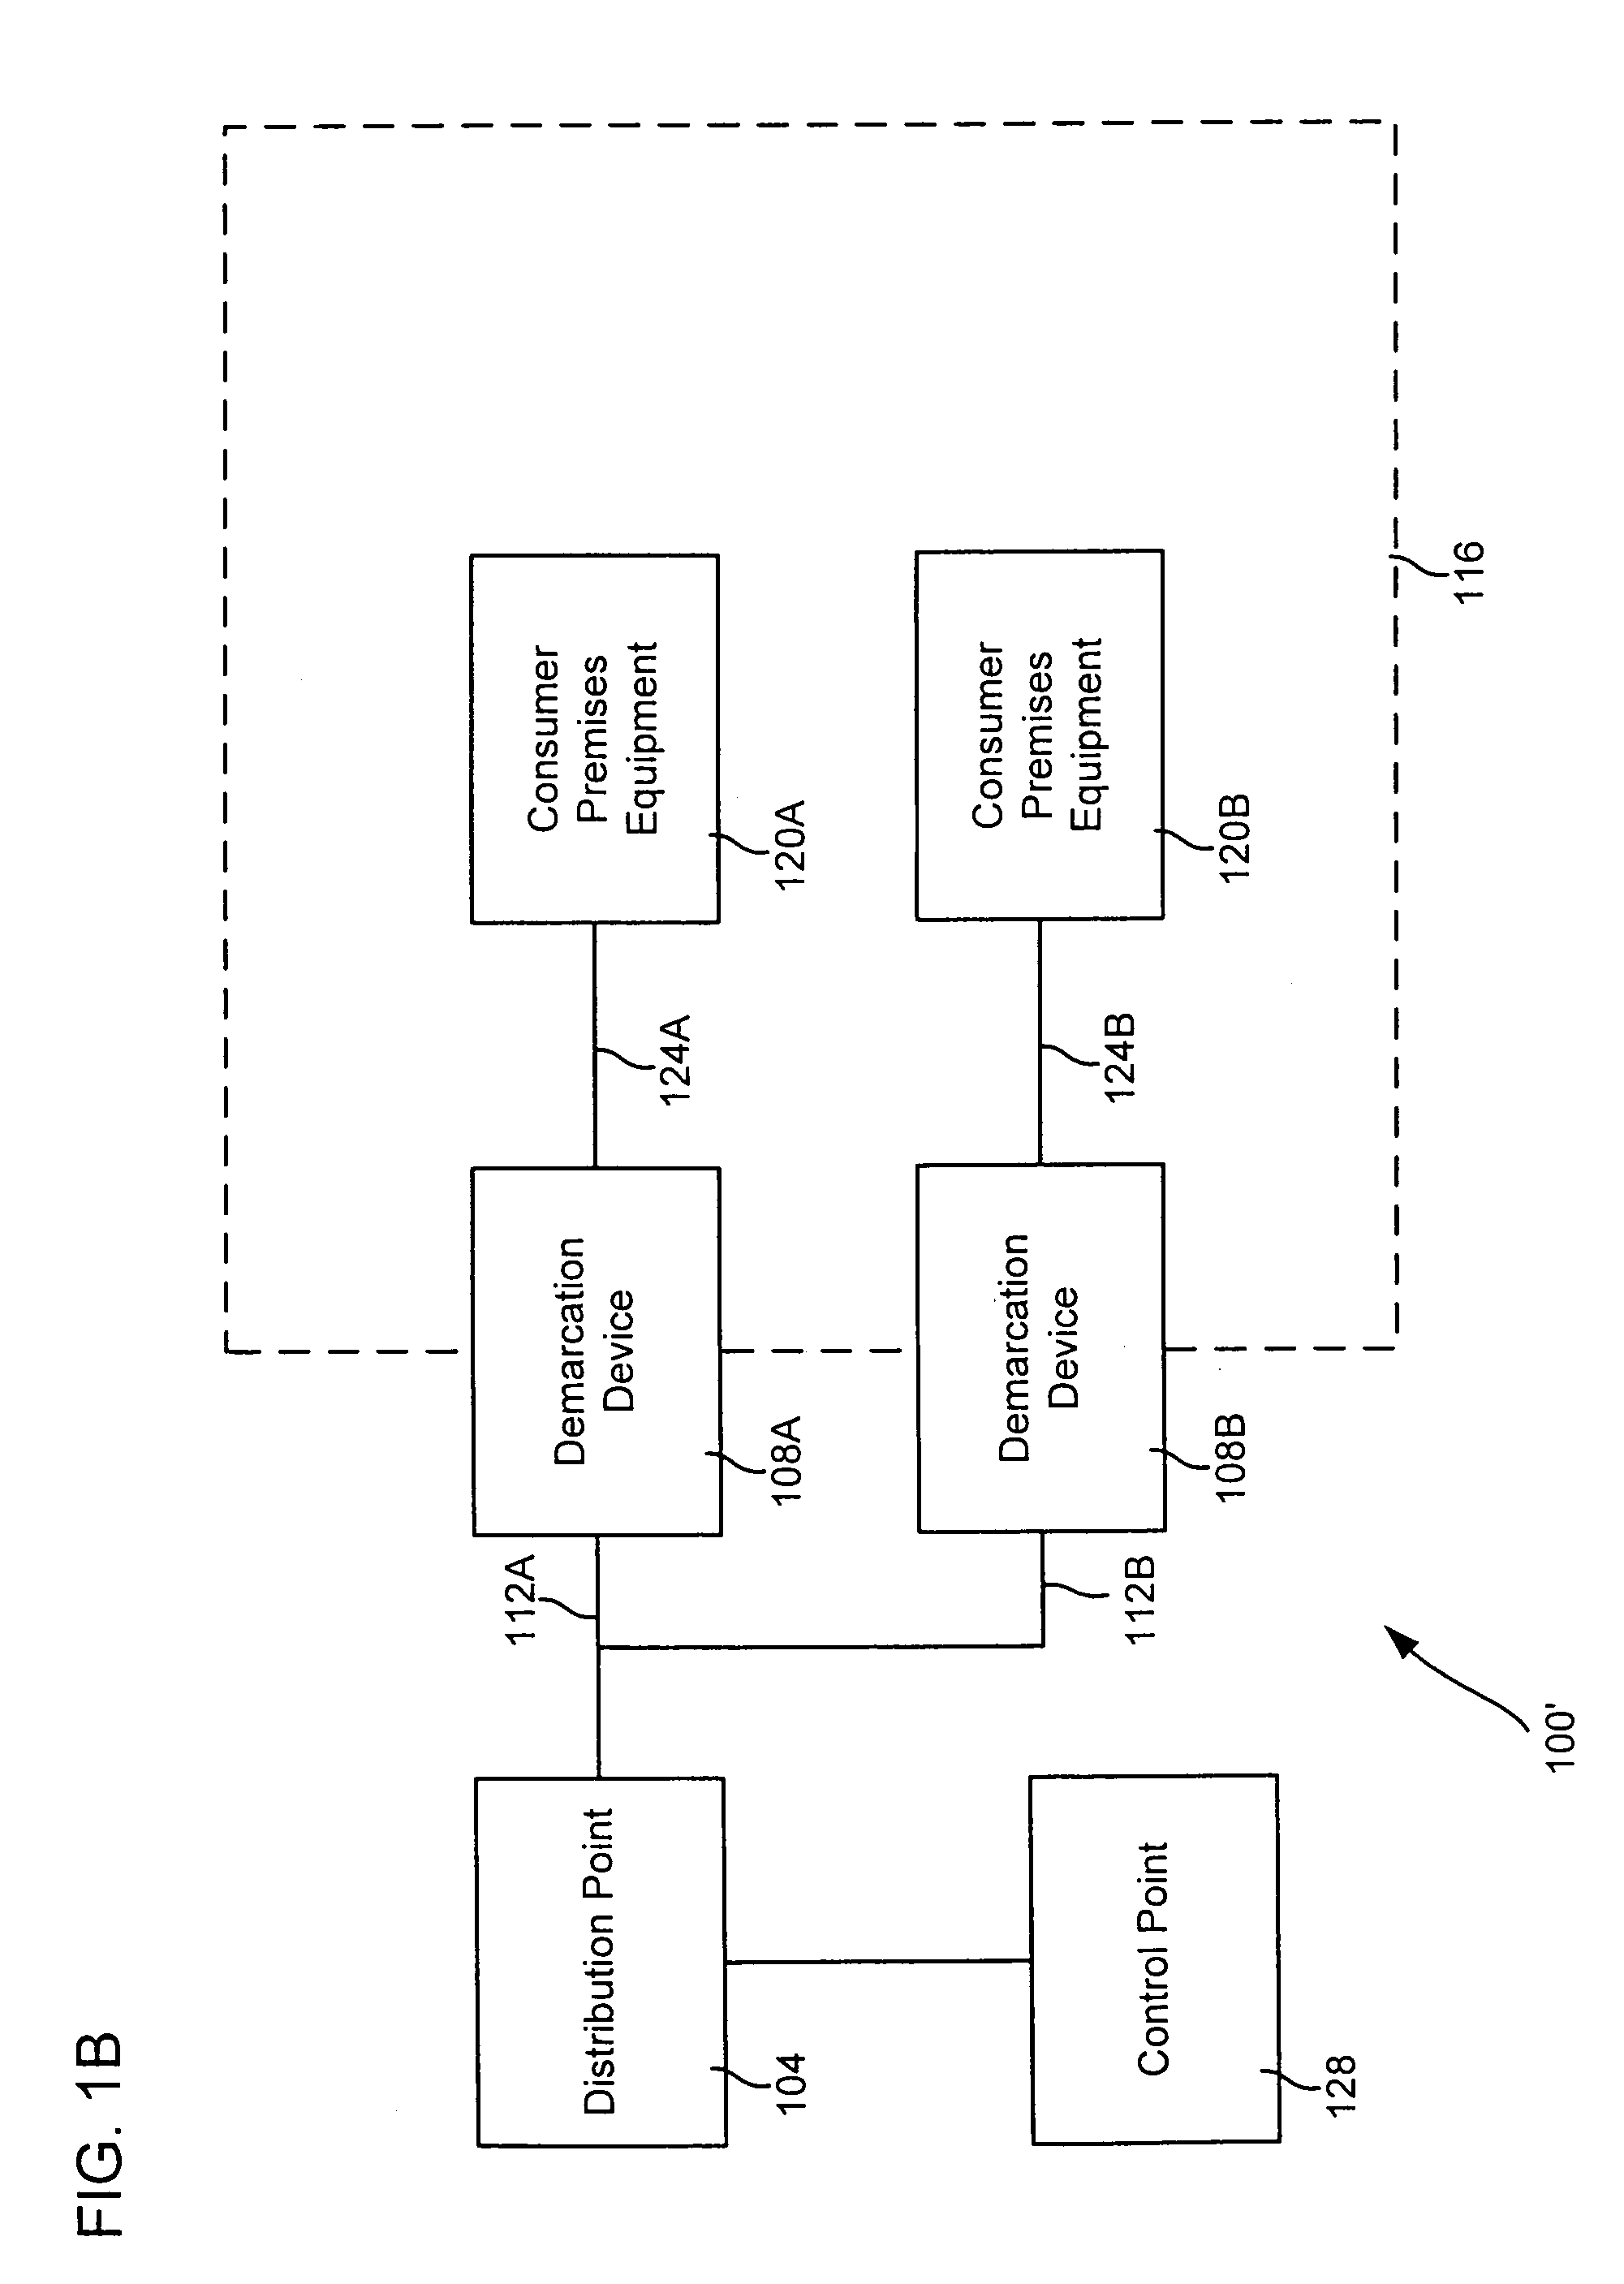 DOCSIS network interface device and methods and systems for using the same